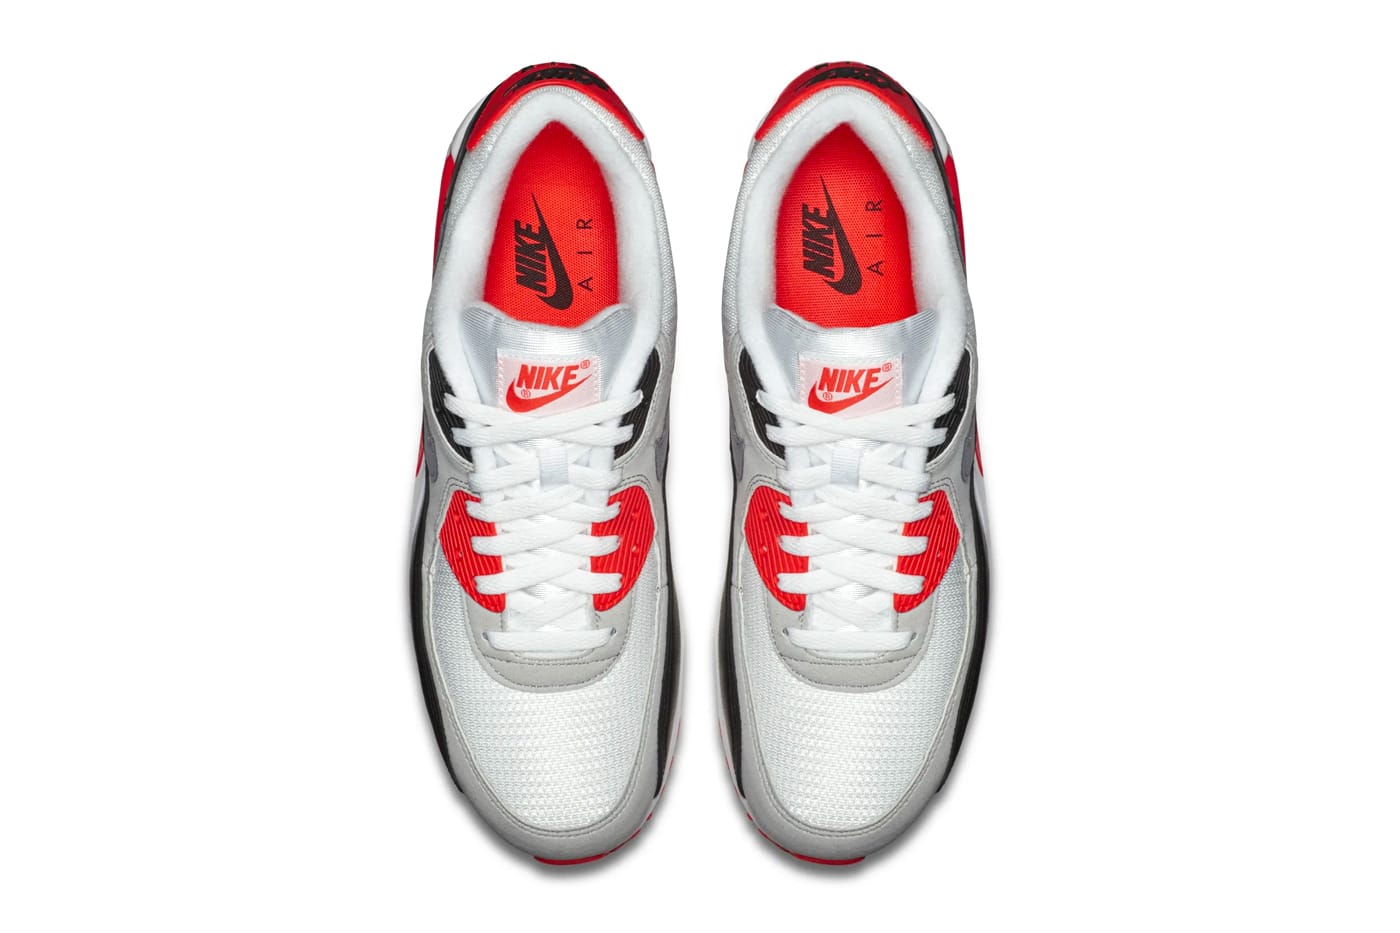 air max 9 infrared release date